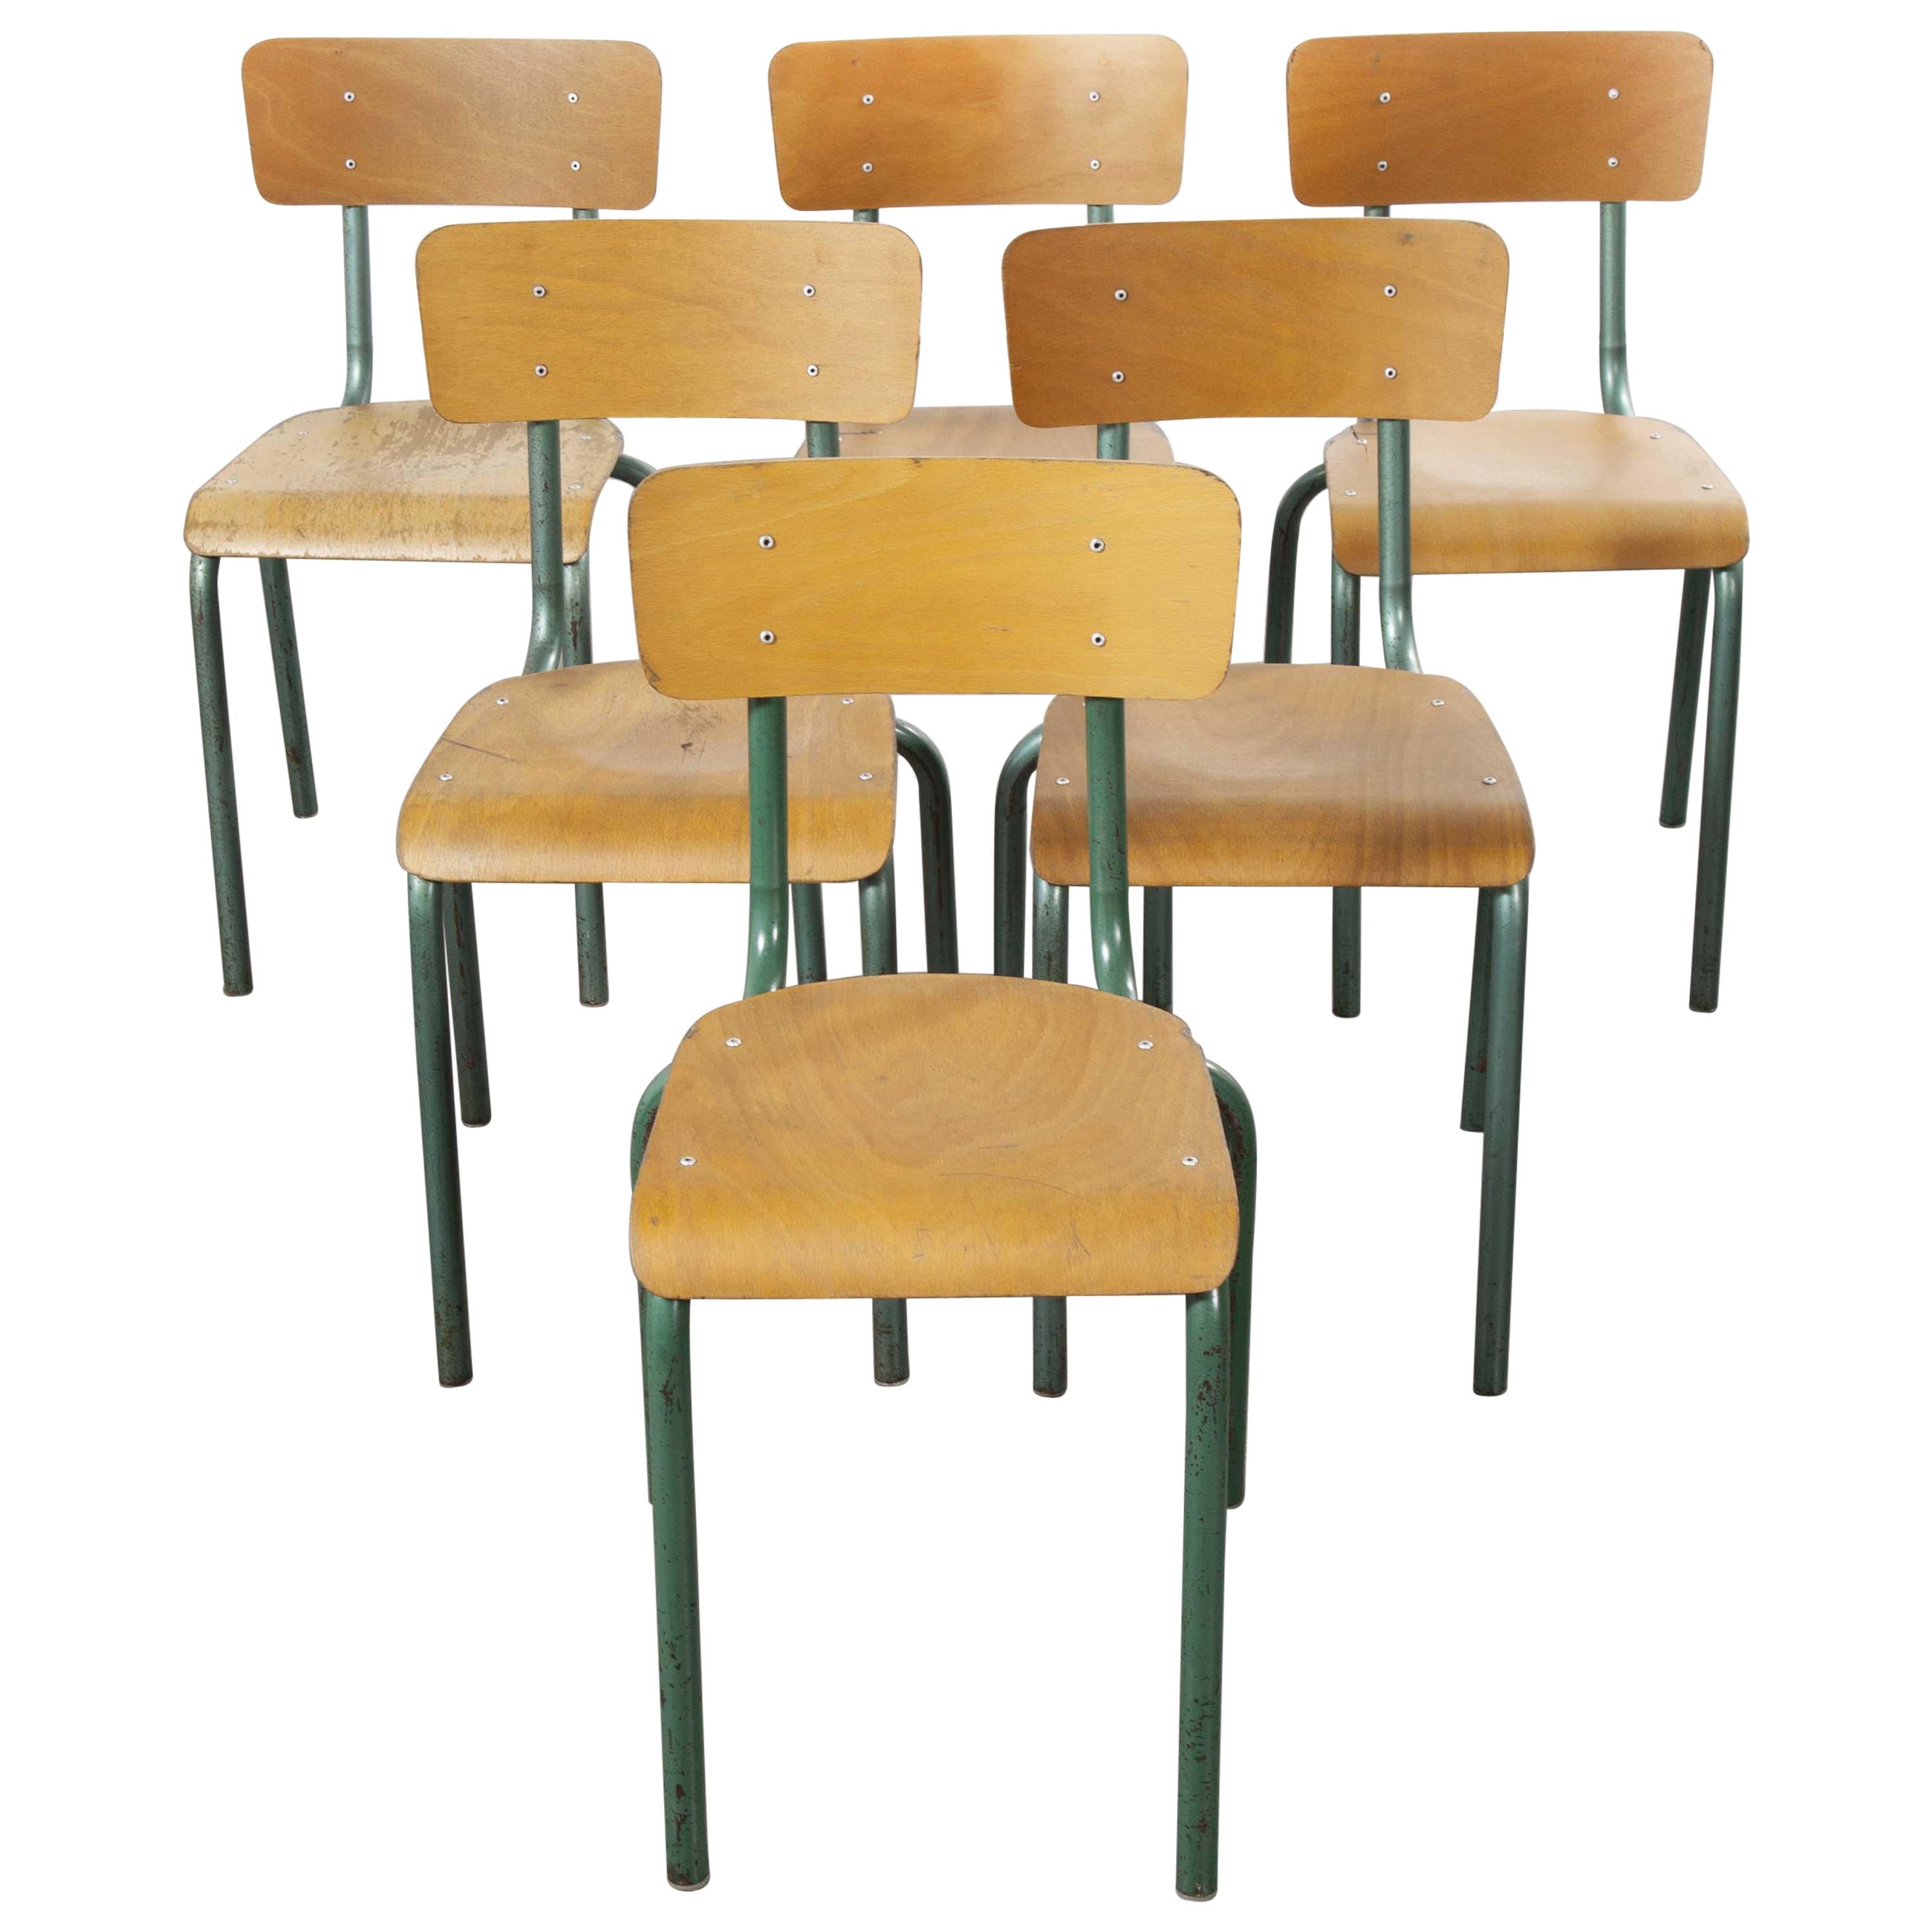 Vintage Stackable School-style Chairs 